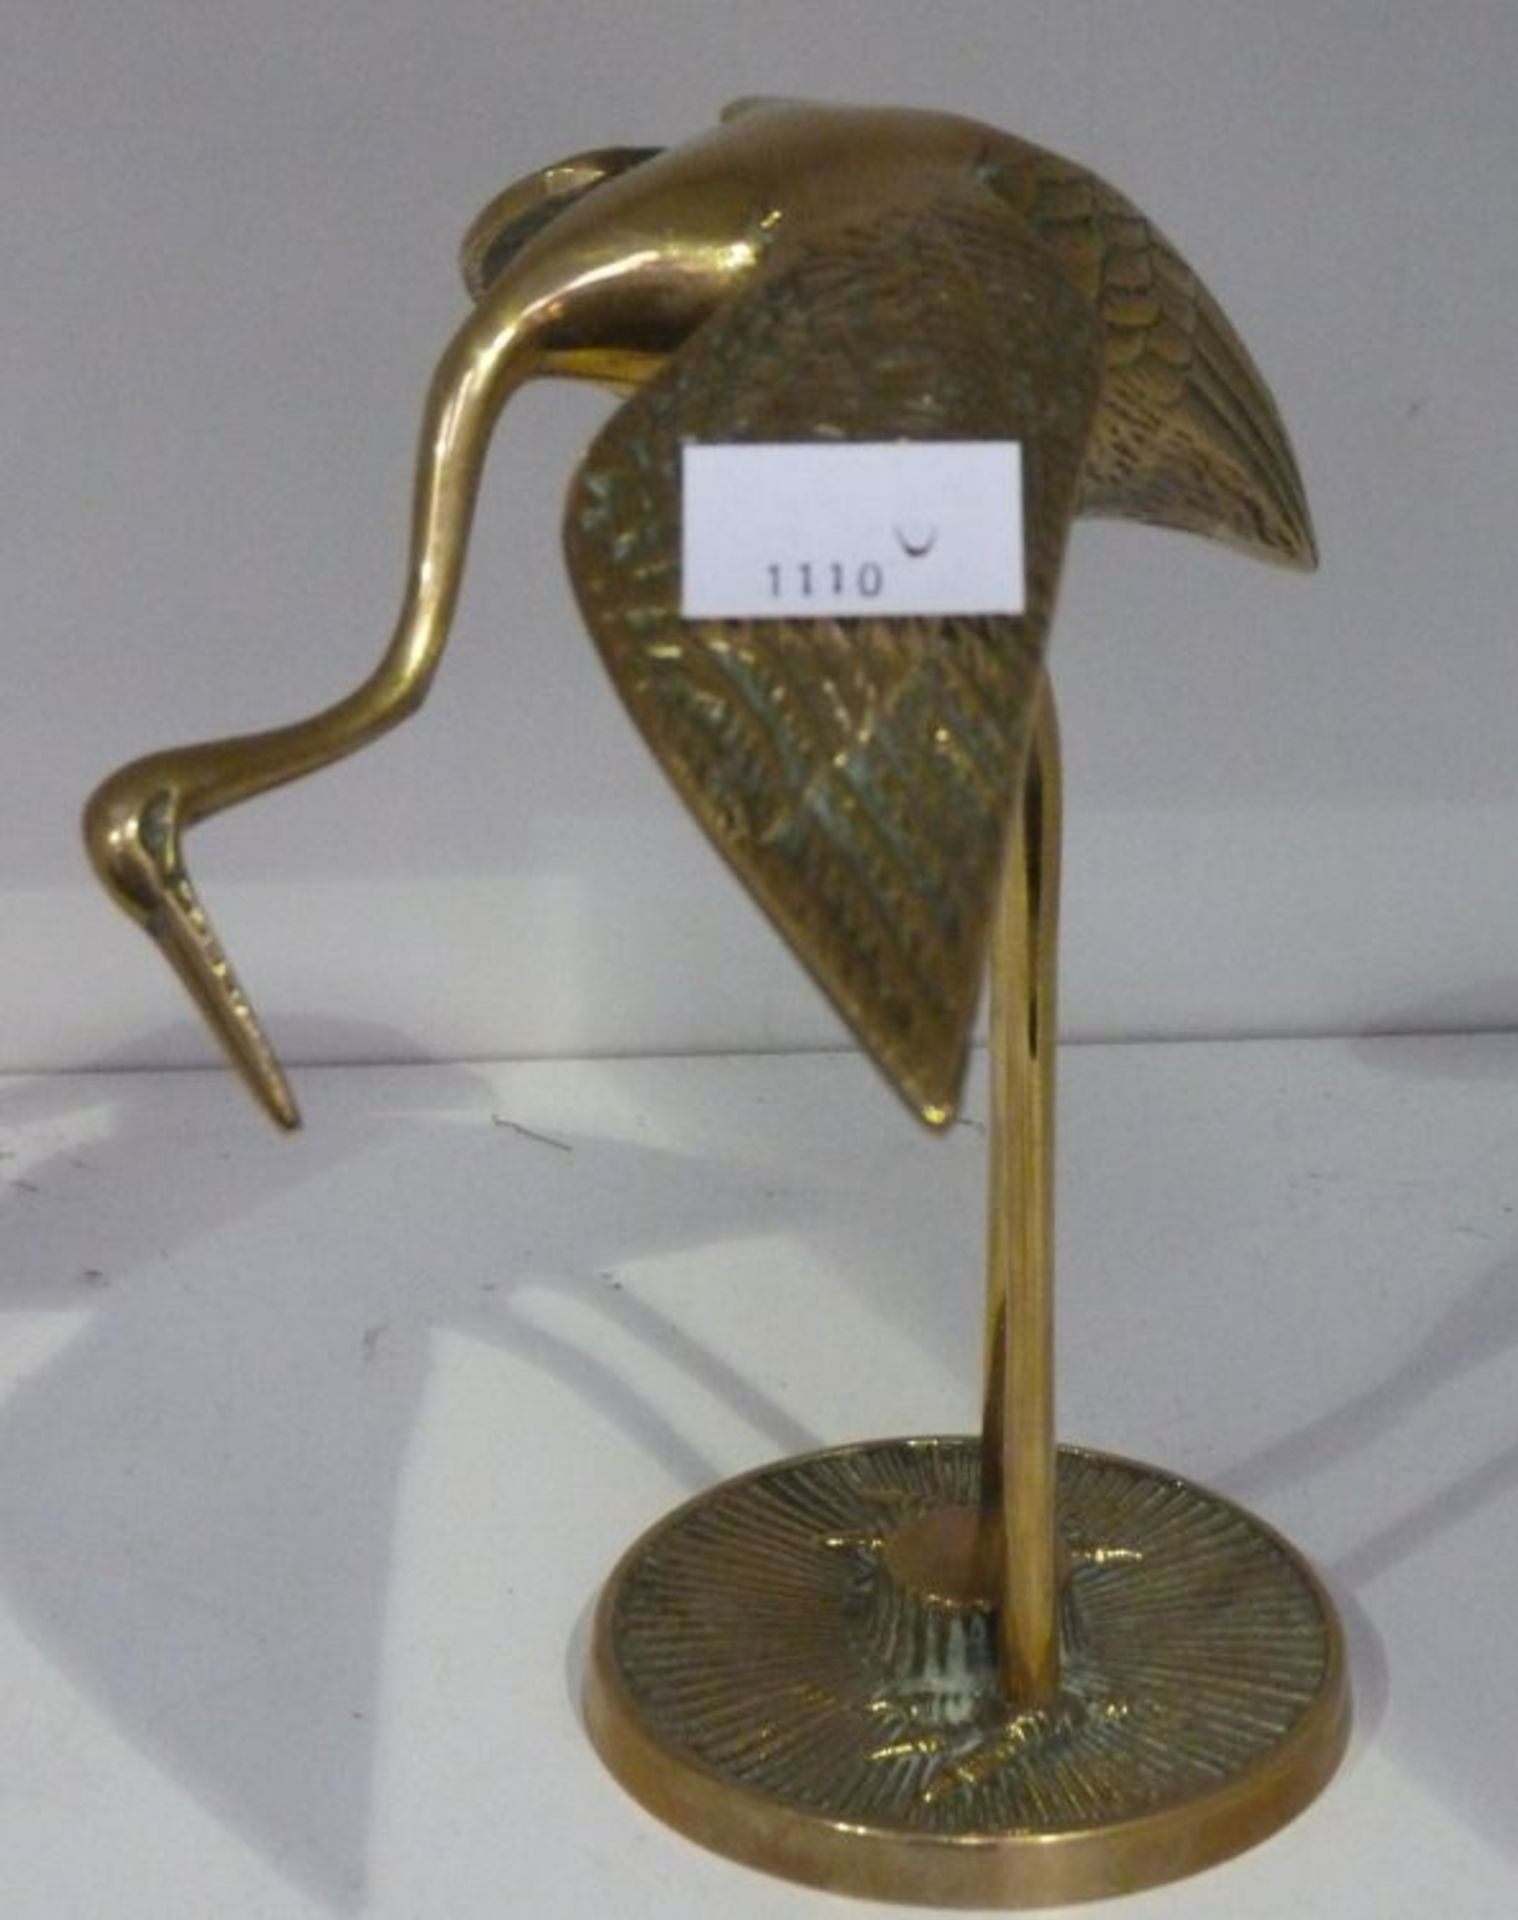 Two Solid Brass Herons, together with four Solid Brass Swans (6) (Est. £20-£30) - Image 3 of 4